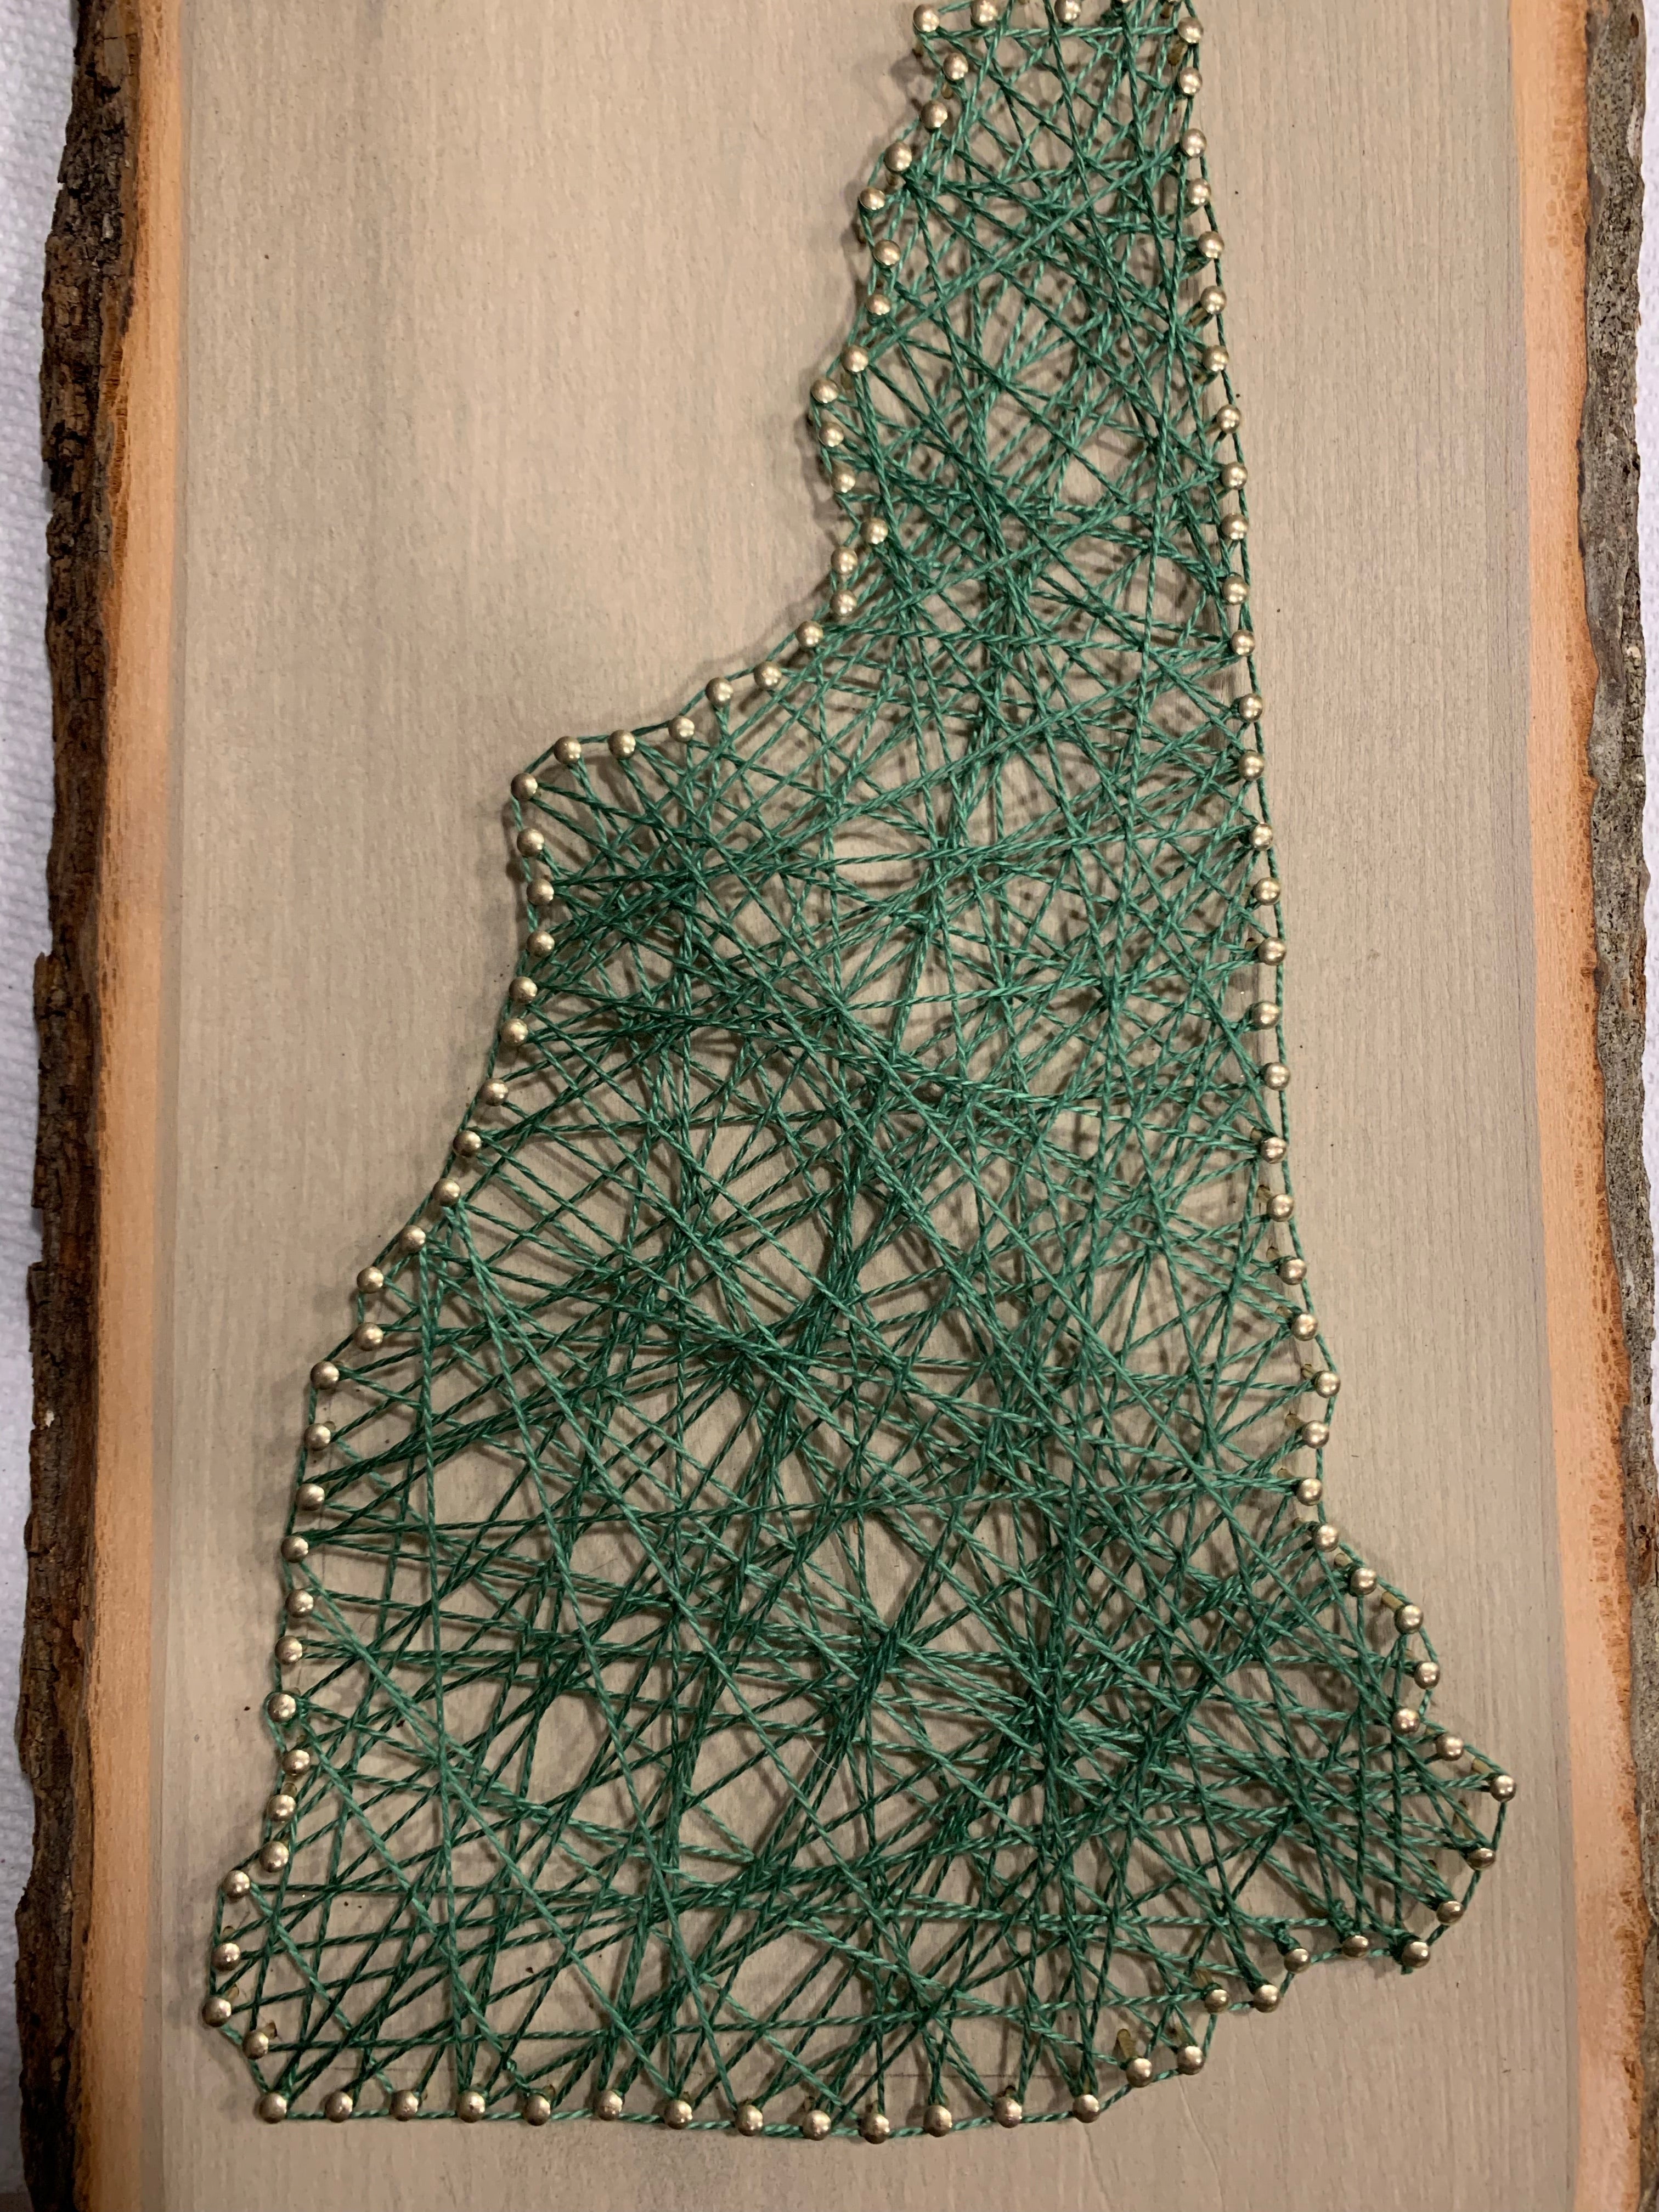 State of New Hampshire String Art